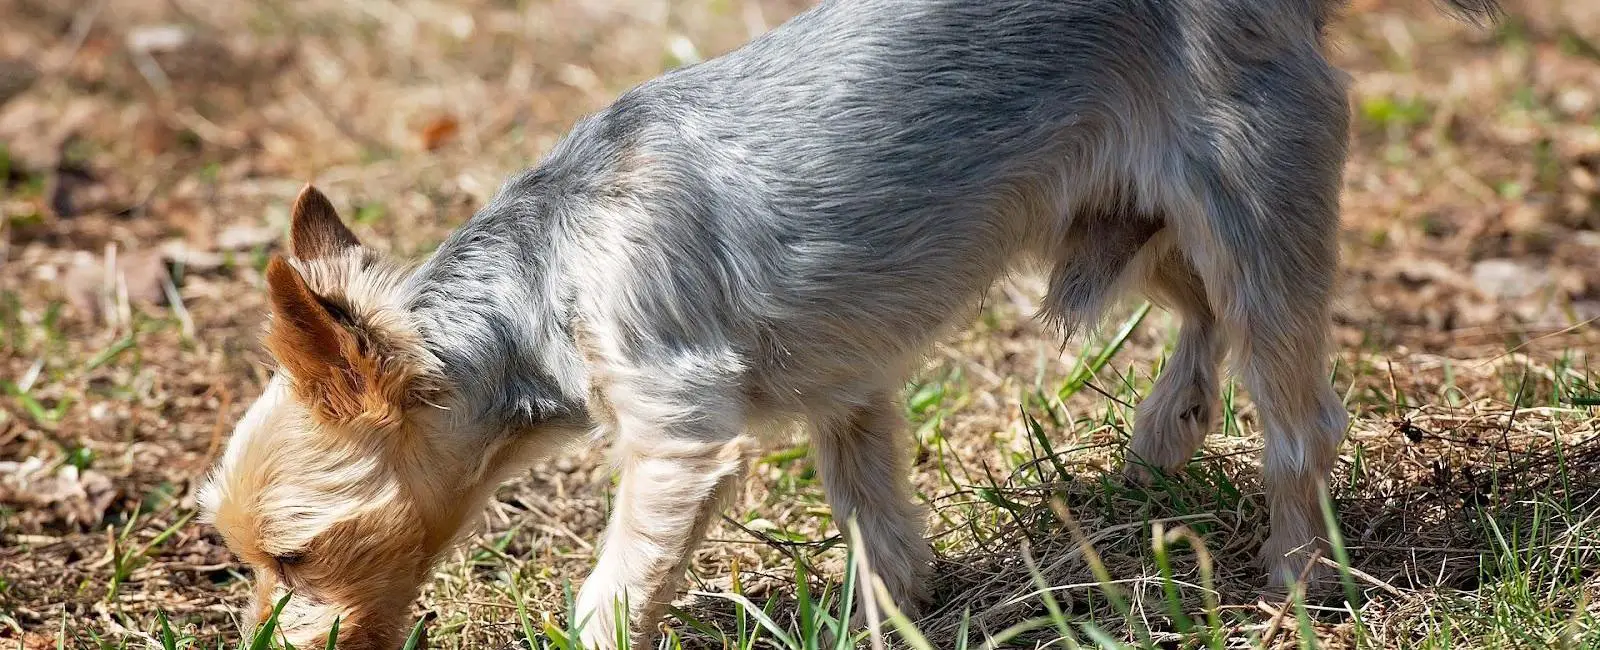 what do dogs sniff for when they poop